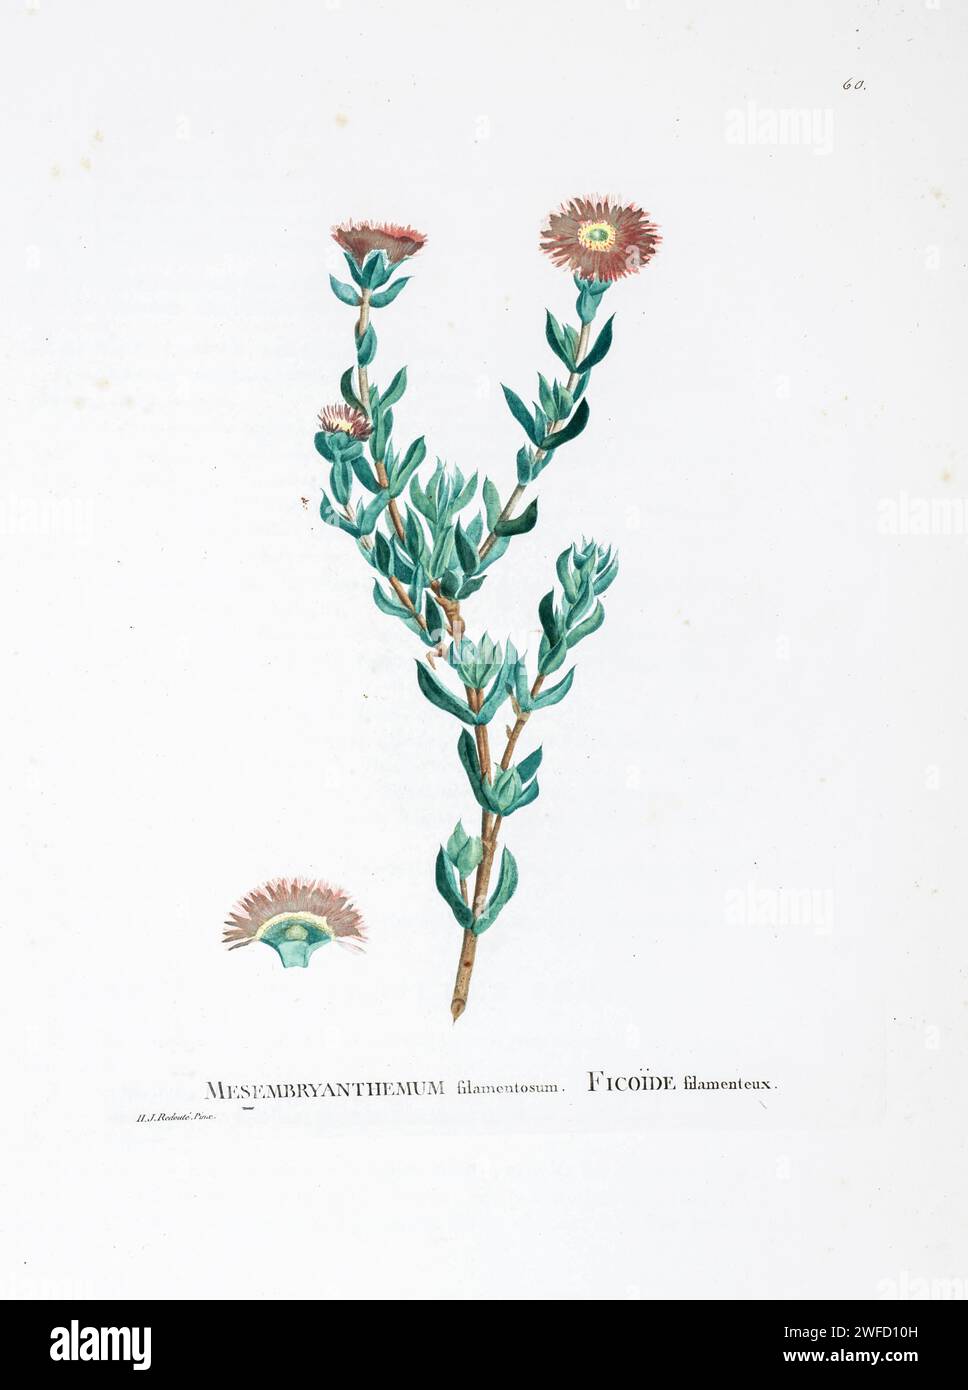 Erepsia mutabilis (Haw.) Schwant. Here As Mesembryanthemum filamentosum from History of Succulent Plants [Plantarum historia succulentarum / Histoire des plantes grasses] painted by Pierre-Joseph Redouté and described by Augustin Pyramus de Candolle 1799 Stock Photo